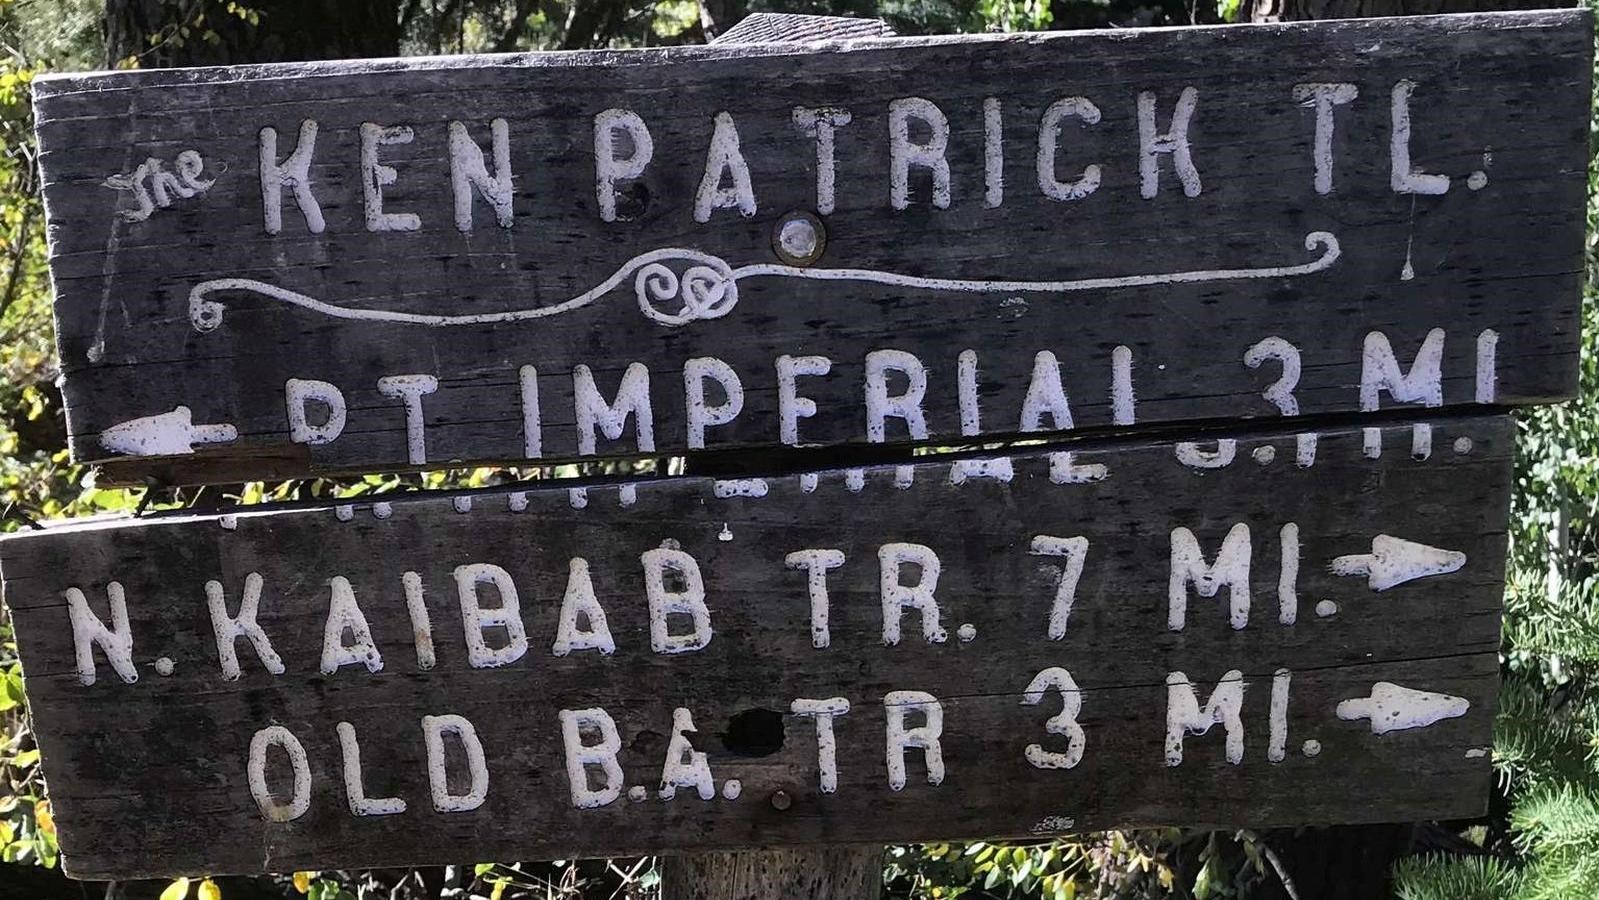 An old wooden sign with carved letters provides mileages and directions for the trail